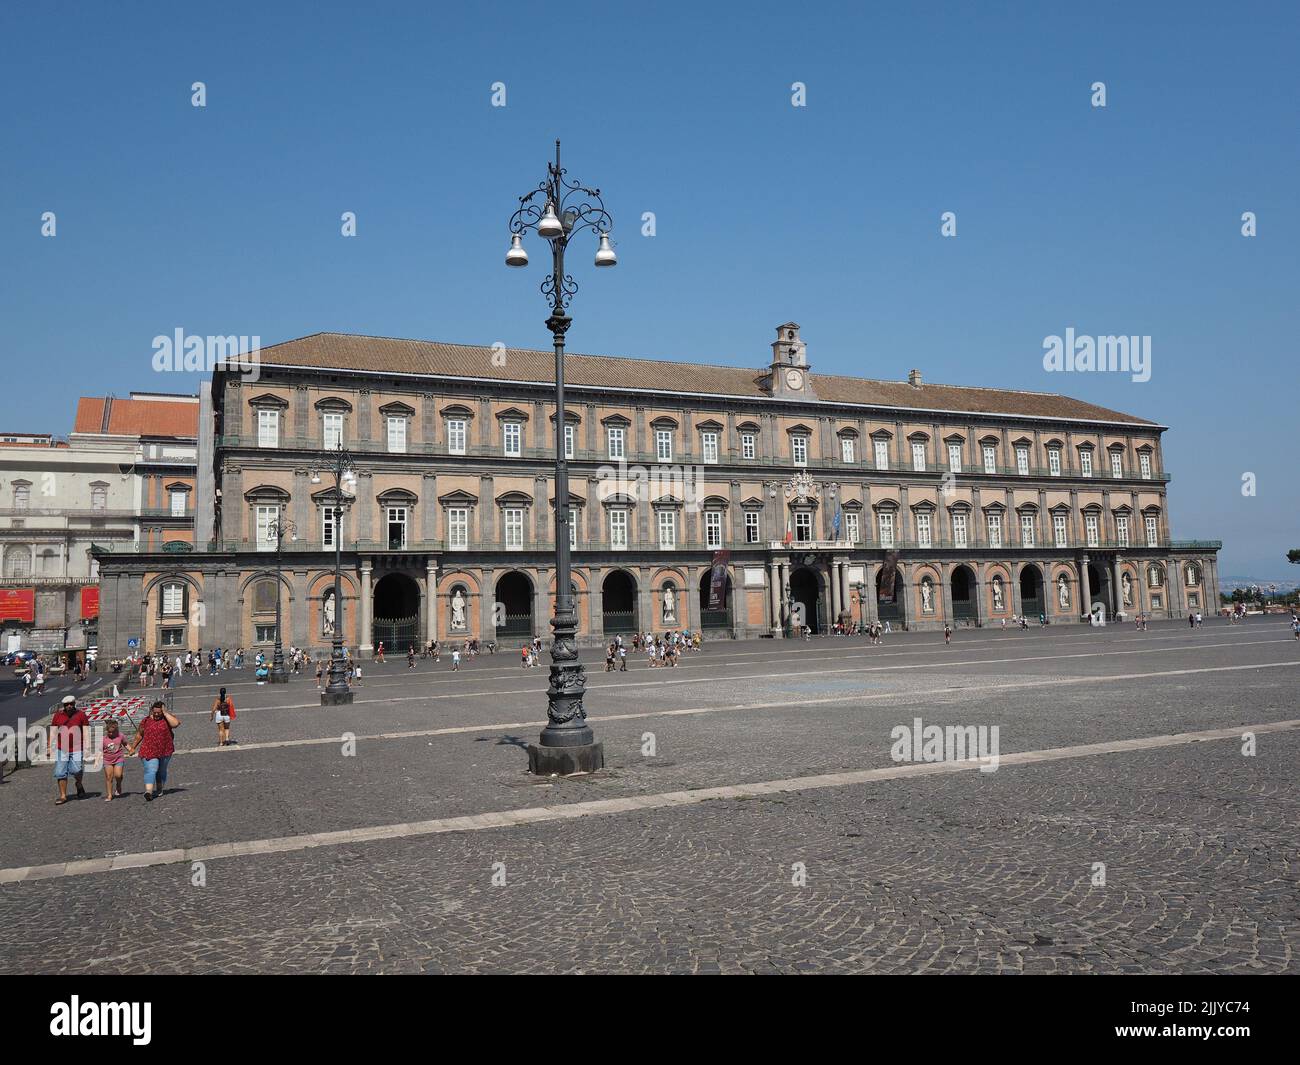 Front facade of the Palazzo Reale, or Royal Palace, in the city center of Naples, Campania, Italy. The facade is decorated with large statues of the k Stock Photo